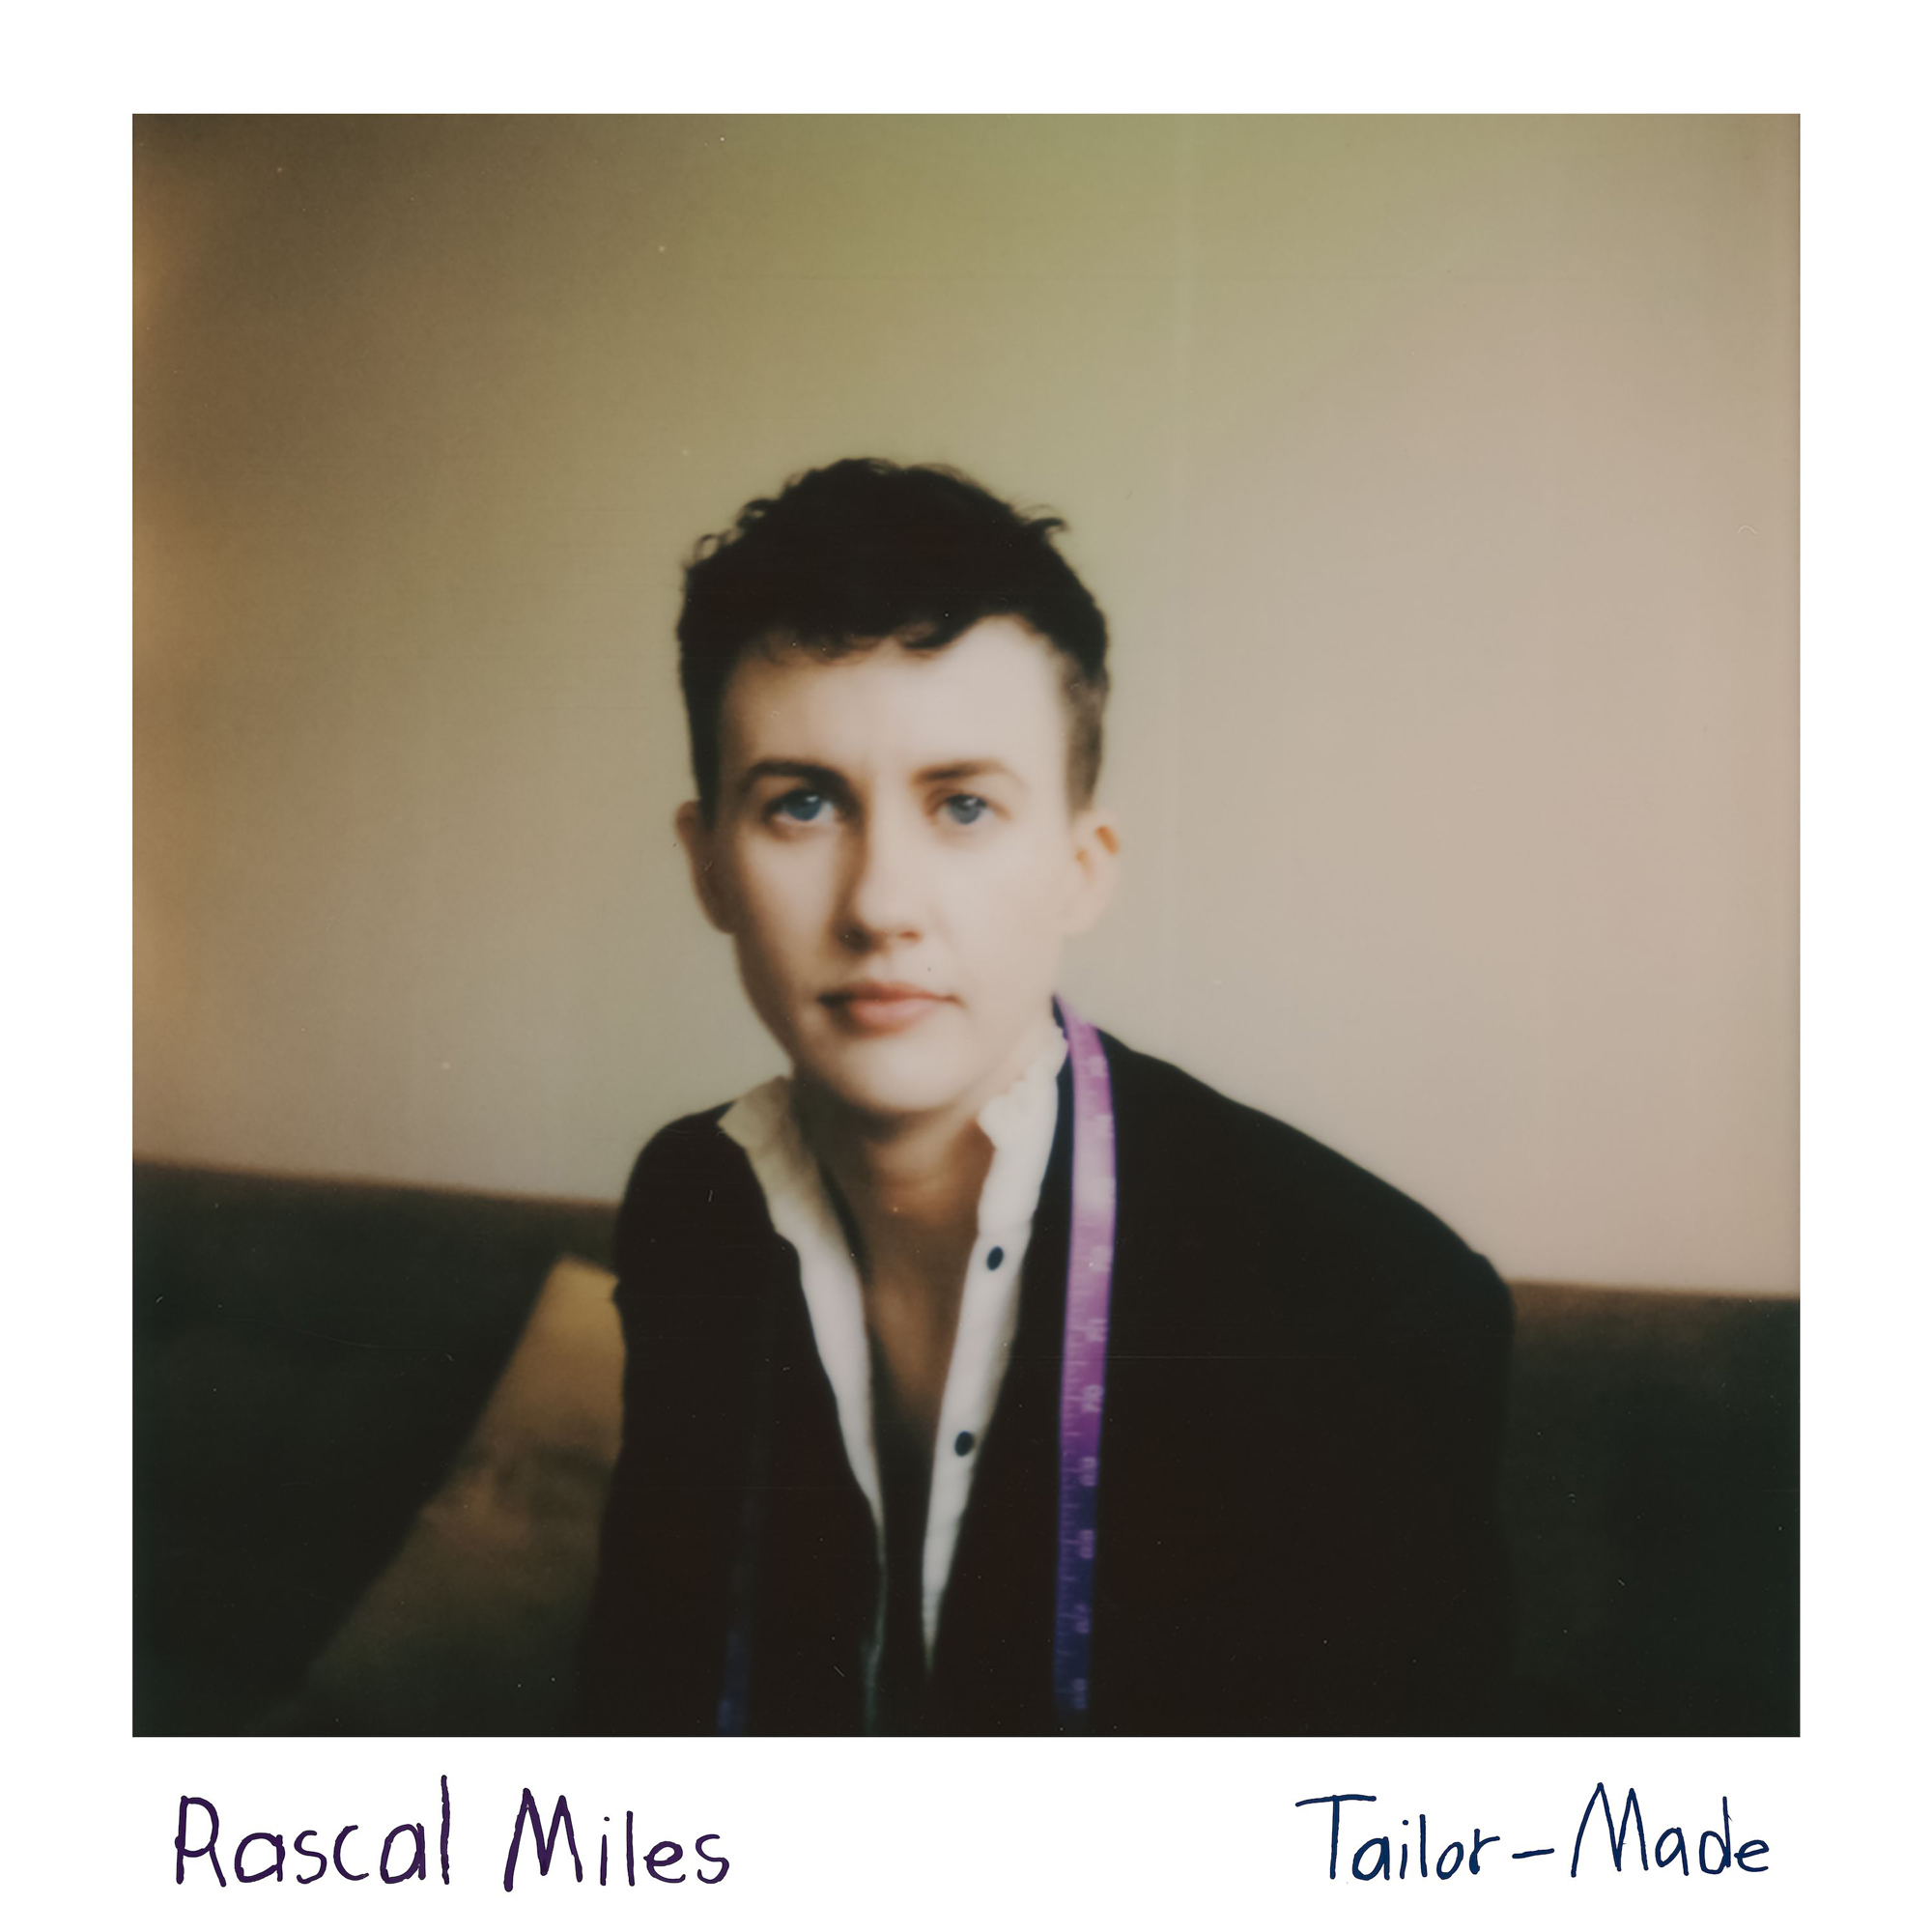 Rascal Miles Tailor-made single art - polaroid photo of Miles sitting on a couch with a purple measuring tape around their neck